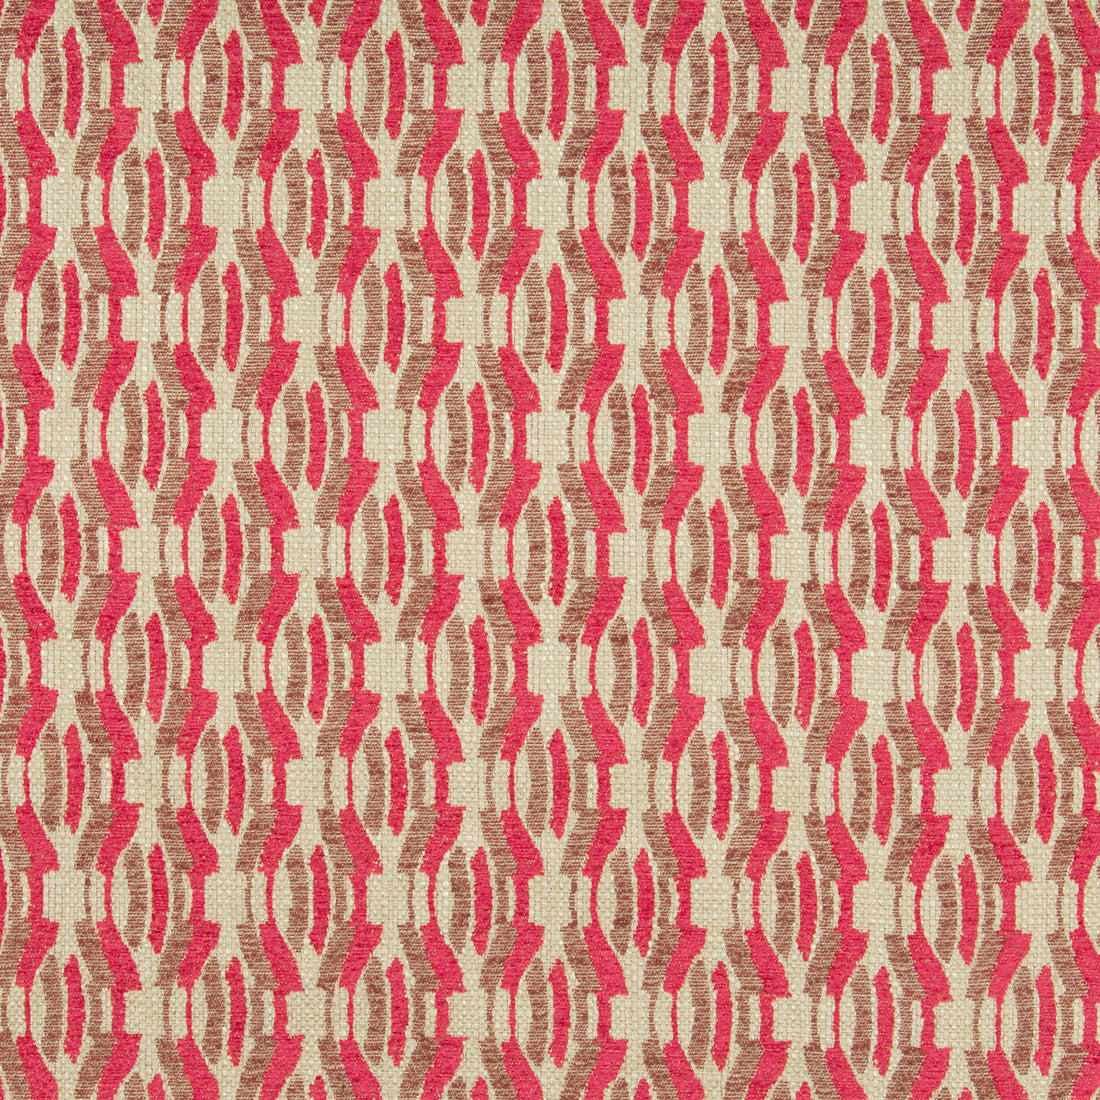 Agate Weave fabric in cerise color - pattern GWF-3748.19.0 - by Lee Jofa Modern in the Gems collection